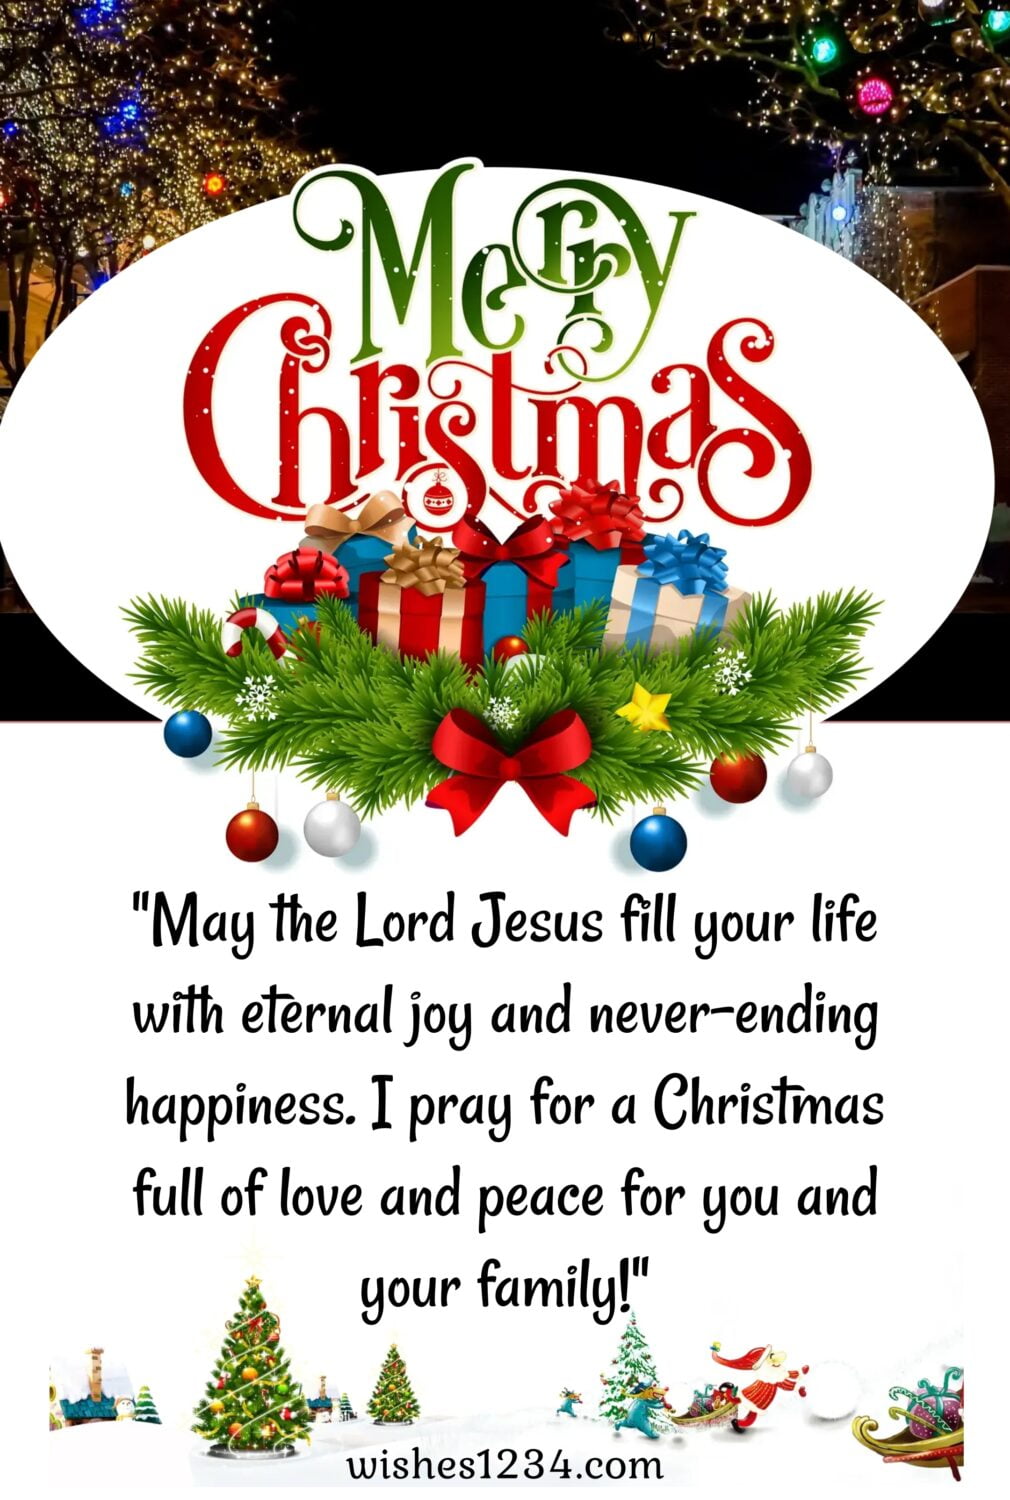 Merry Christmas greetings with gift box, Merry Christmas Quotes & short wishes.